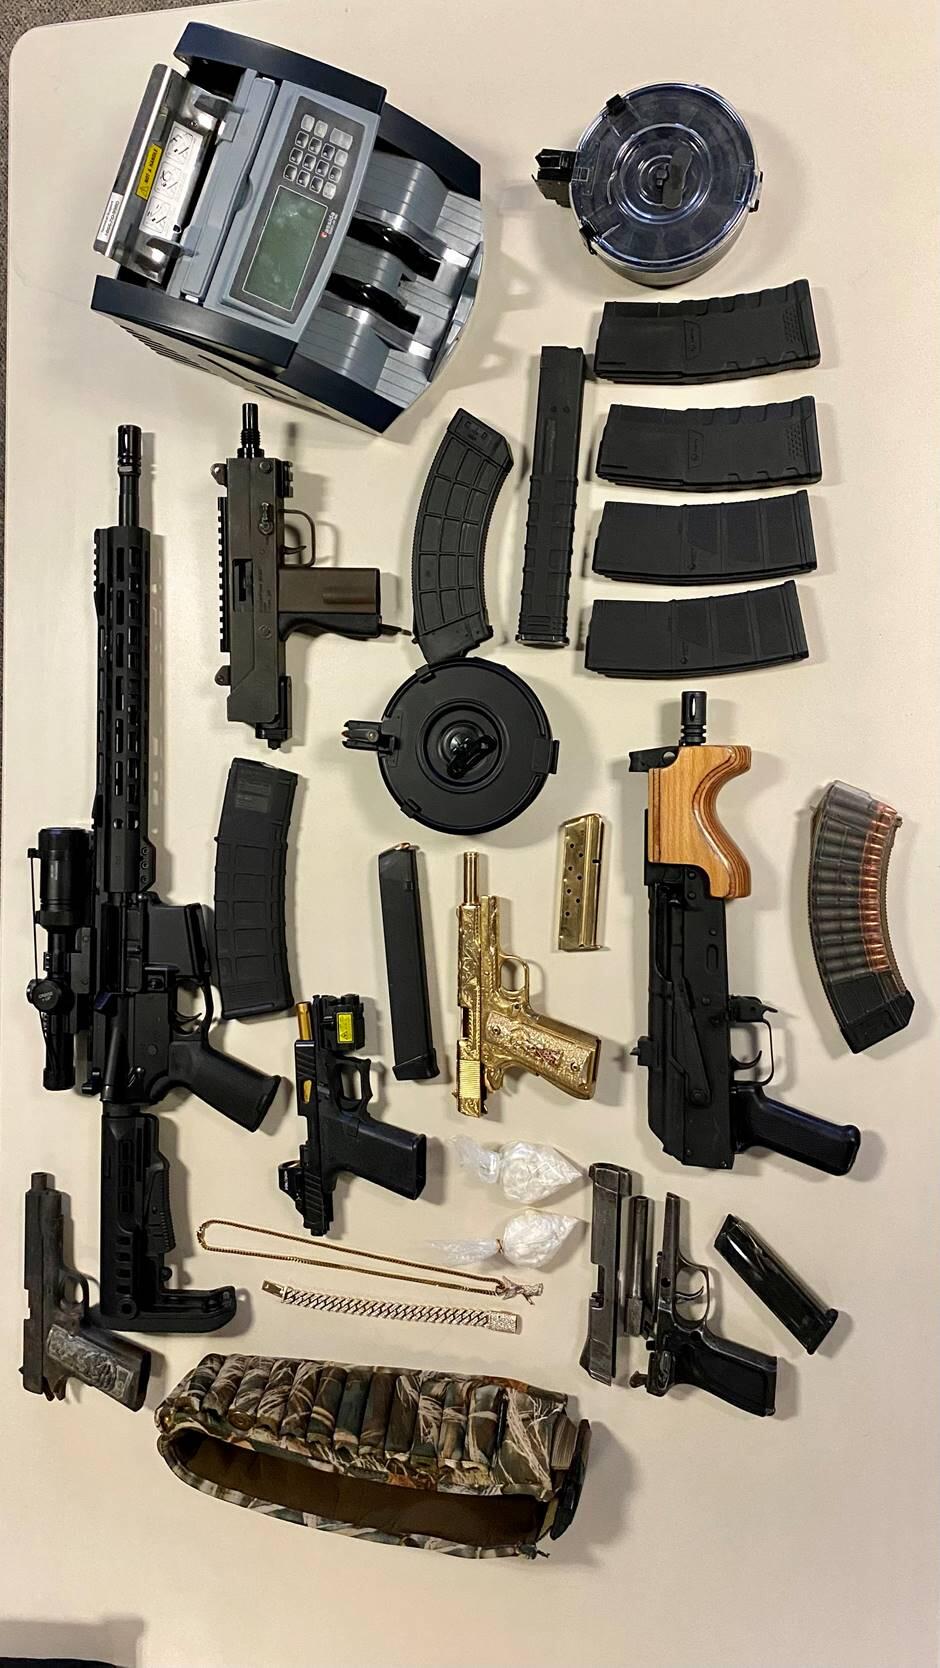 This image shows guns and ammunition Santa Rosa police confiscated during an investigation on Wednesday, Dec. 8, 2021. A Rohnert Park man is suspected of possessing the guns and drug possession. (Santa Rosa Police Department)